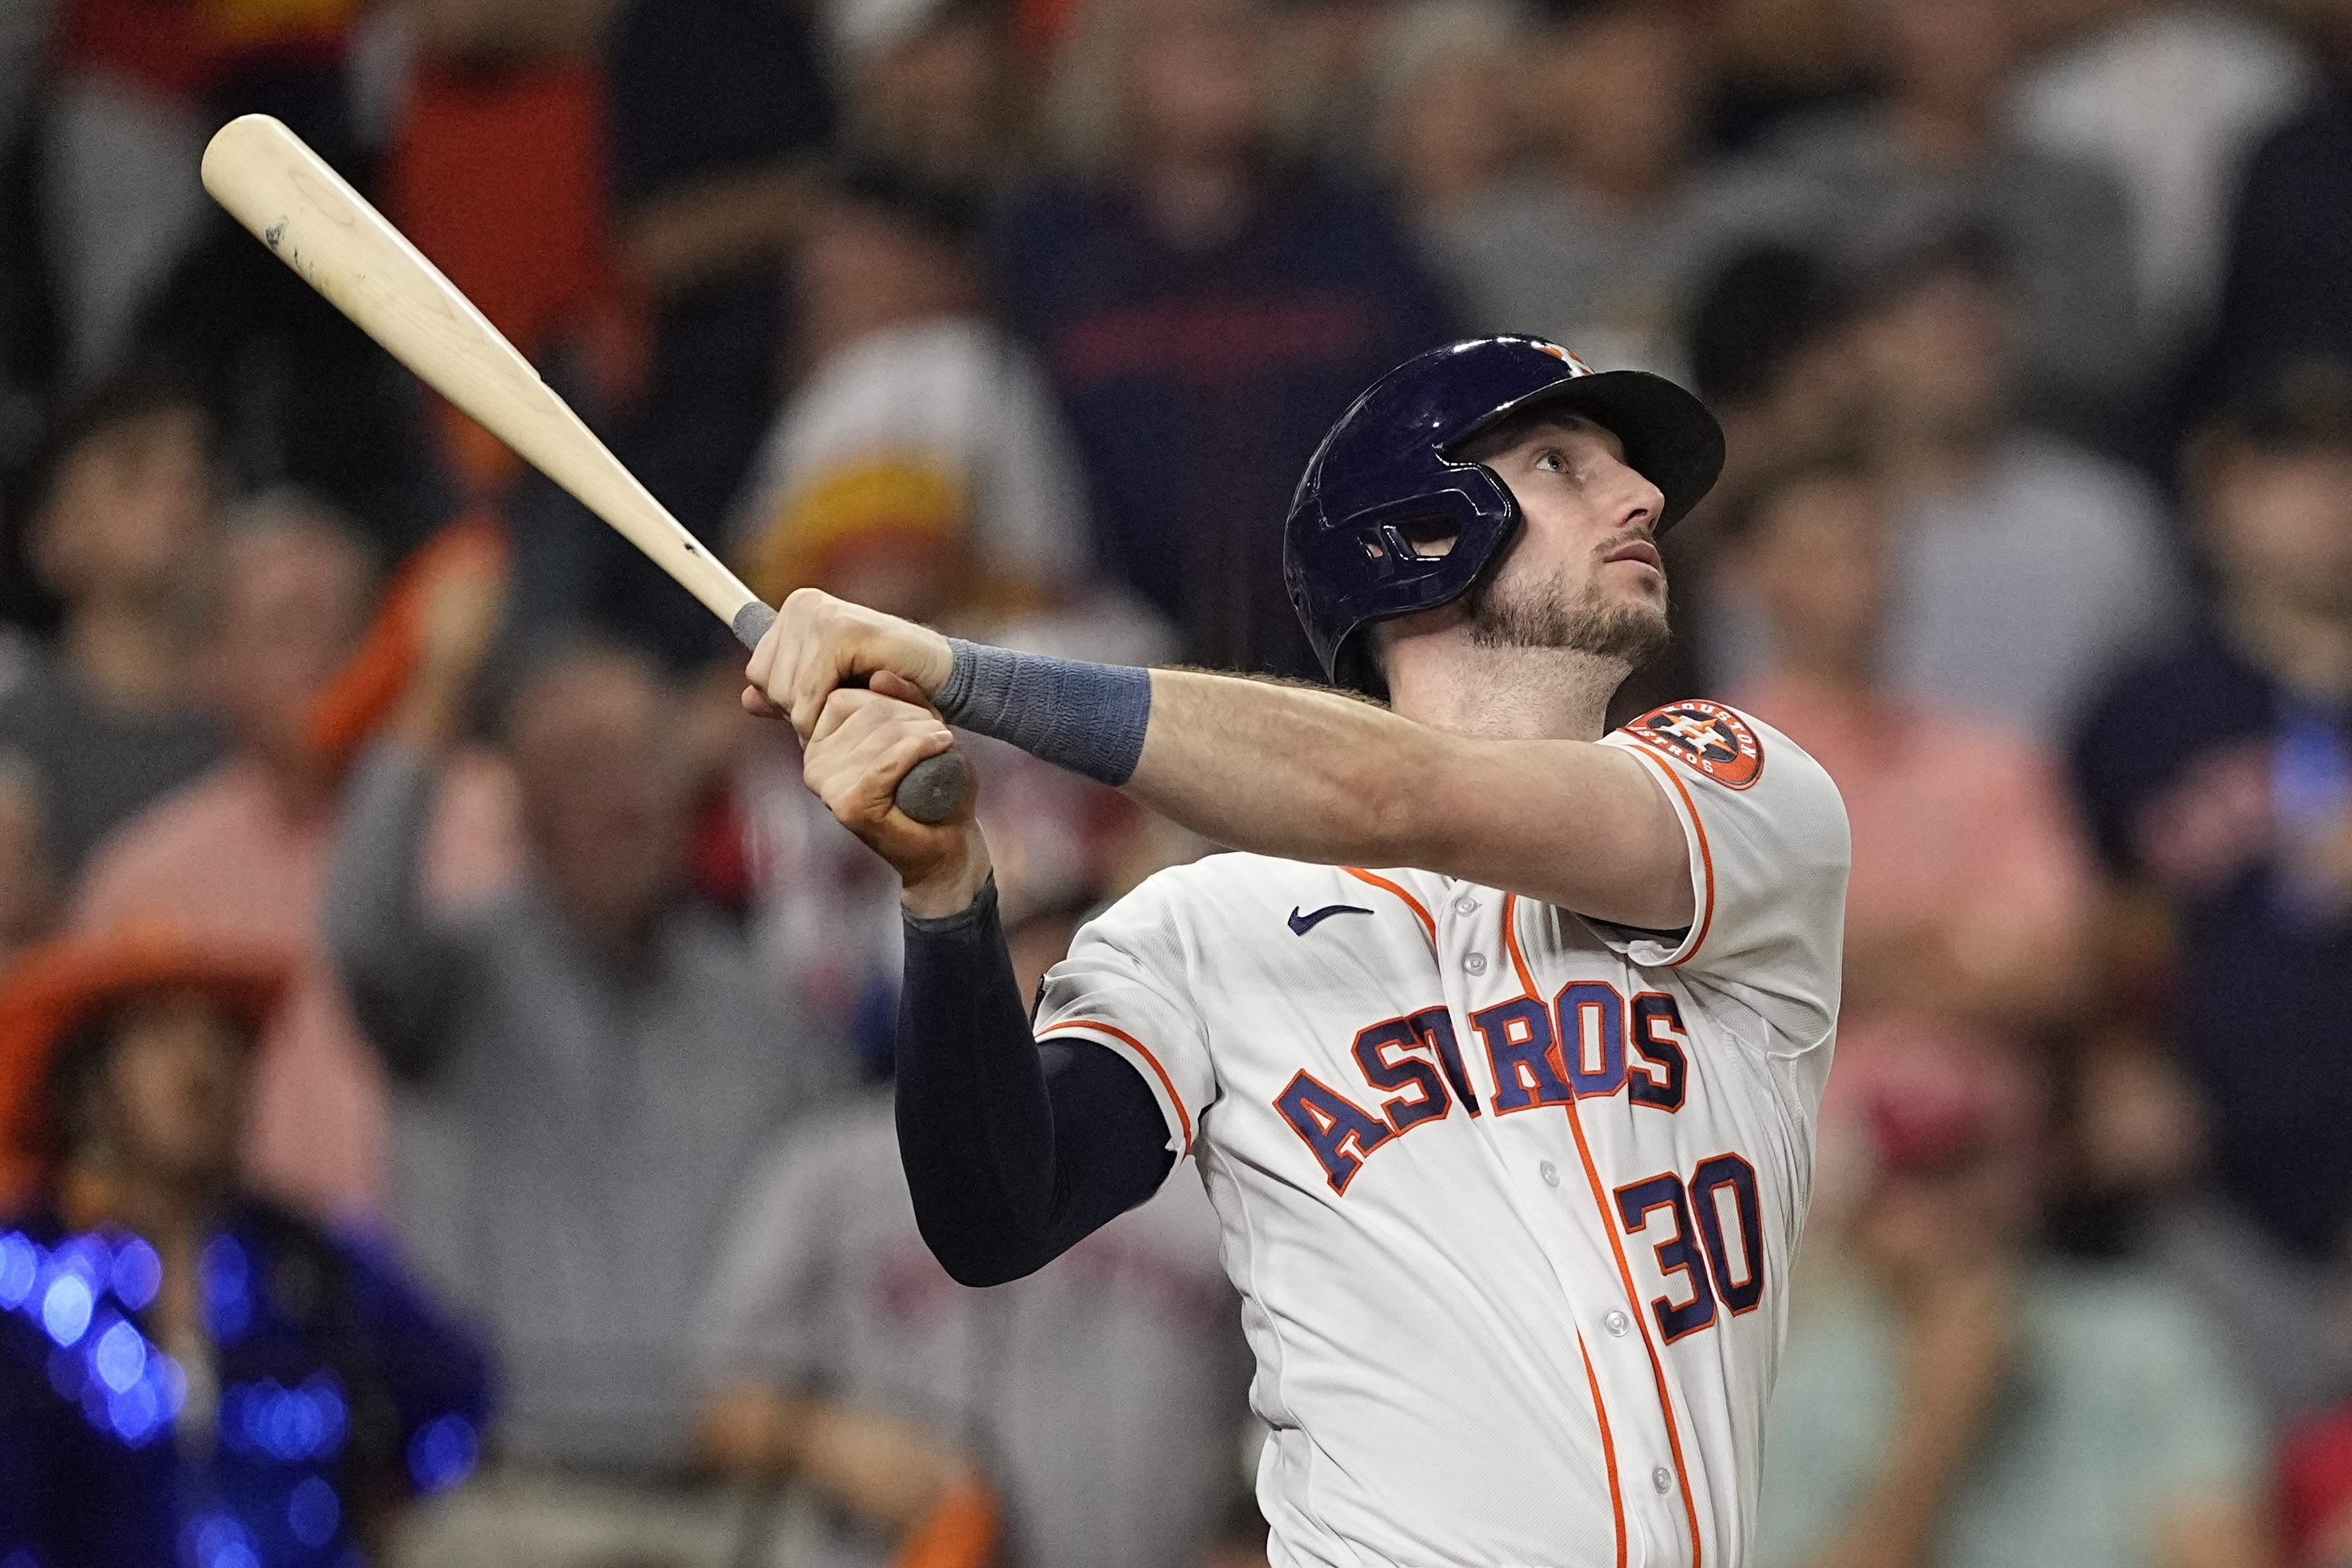 Why MLB's pitch clock led Astros' Kyle Tucker to ditch barehanded